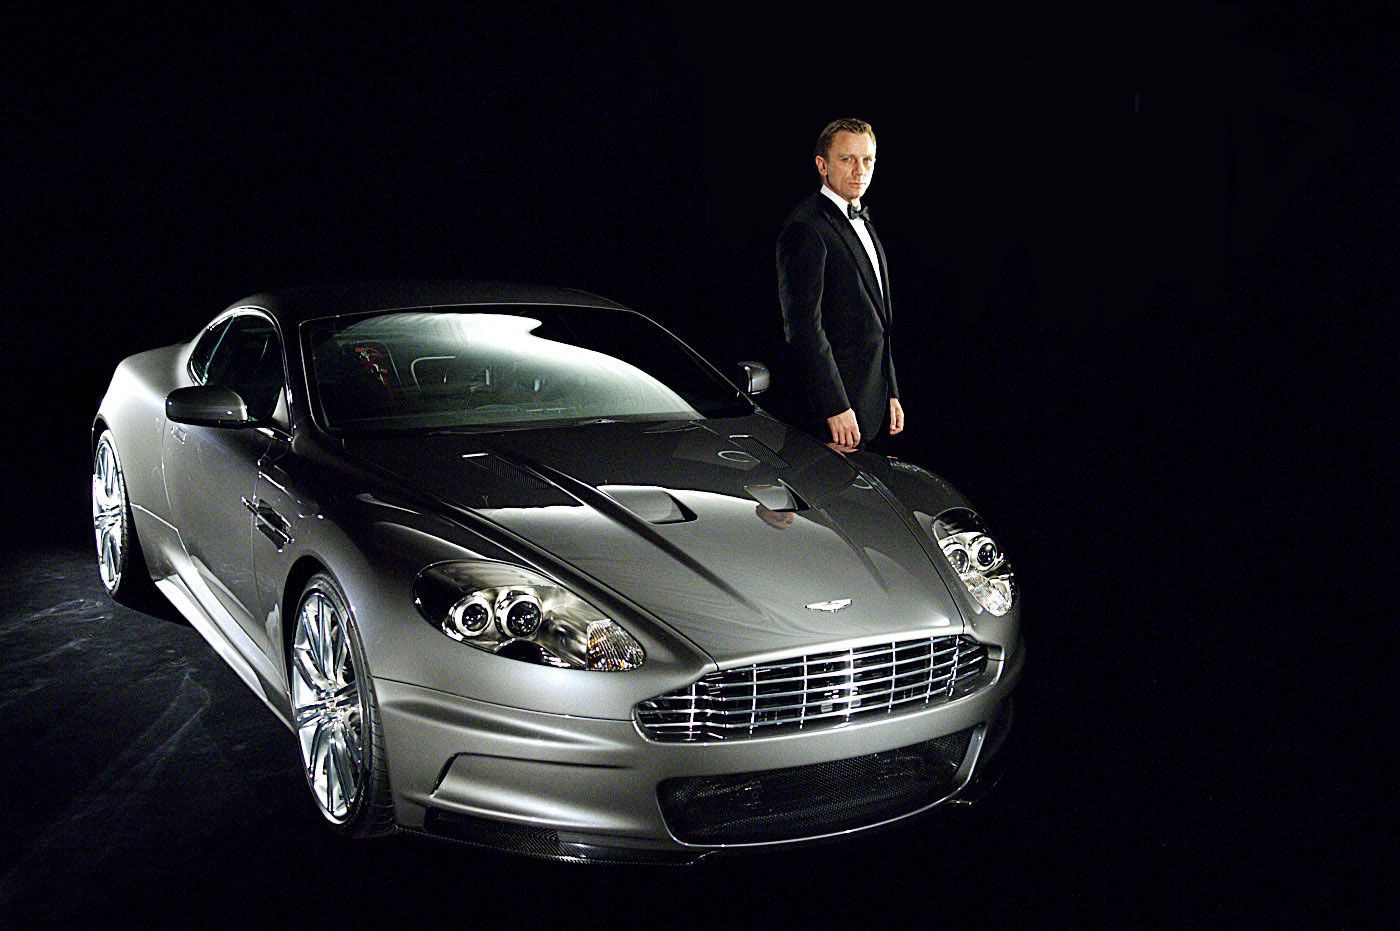 Casino Royale (2006) – DB5, Aston Martin DBS V12 - The Driver: A craggy Daniel Craig was tapped to lead this origin story, a reinvention of the brand absent invisible cars and shoe-knives. This Bond fought with savage strength but ultimately succumbed to the wiles of Eva Green (who wouldn’t?).The Car: While the movie as a whole was a revolution, the car was very much an evolution: a tuned, lightened version of Aston’s DB9 warhorse.The Evolutionary Leap: The new Bond, soulful and brooding, didn’t have to rely so much on gadgets and grenades. Its role diminished, the Aston made a brief appearance before getting flipped in one of the greatest single-car crashes in cinema history.